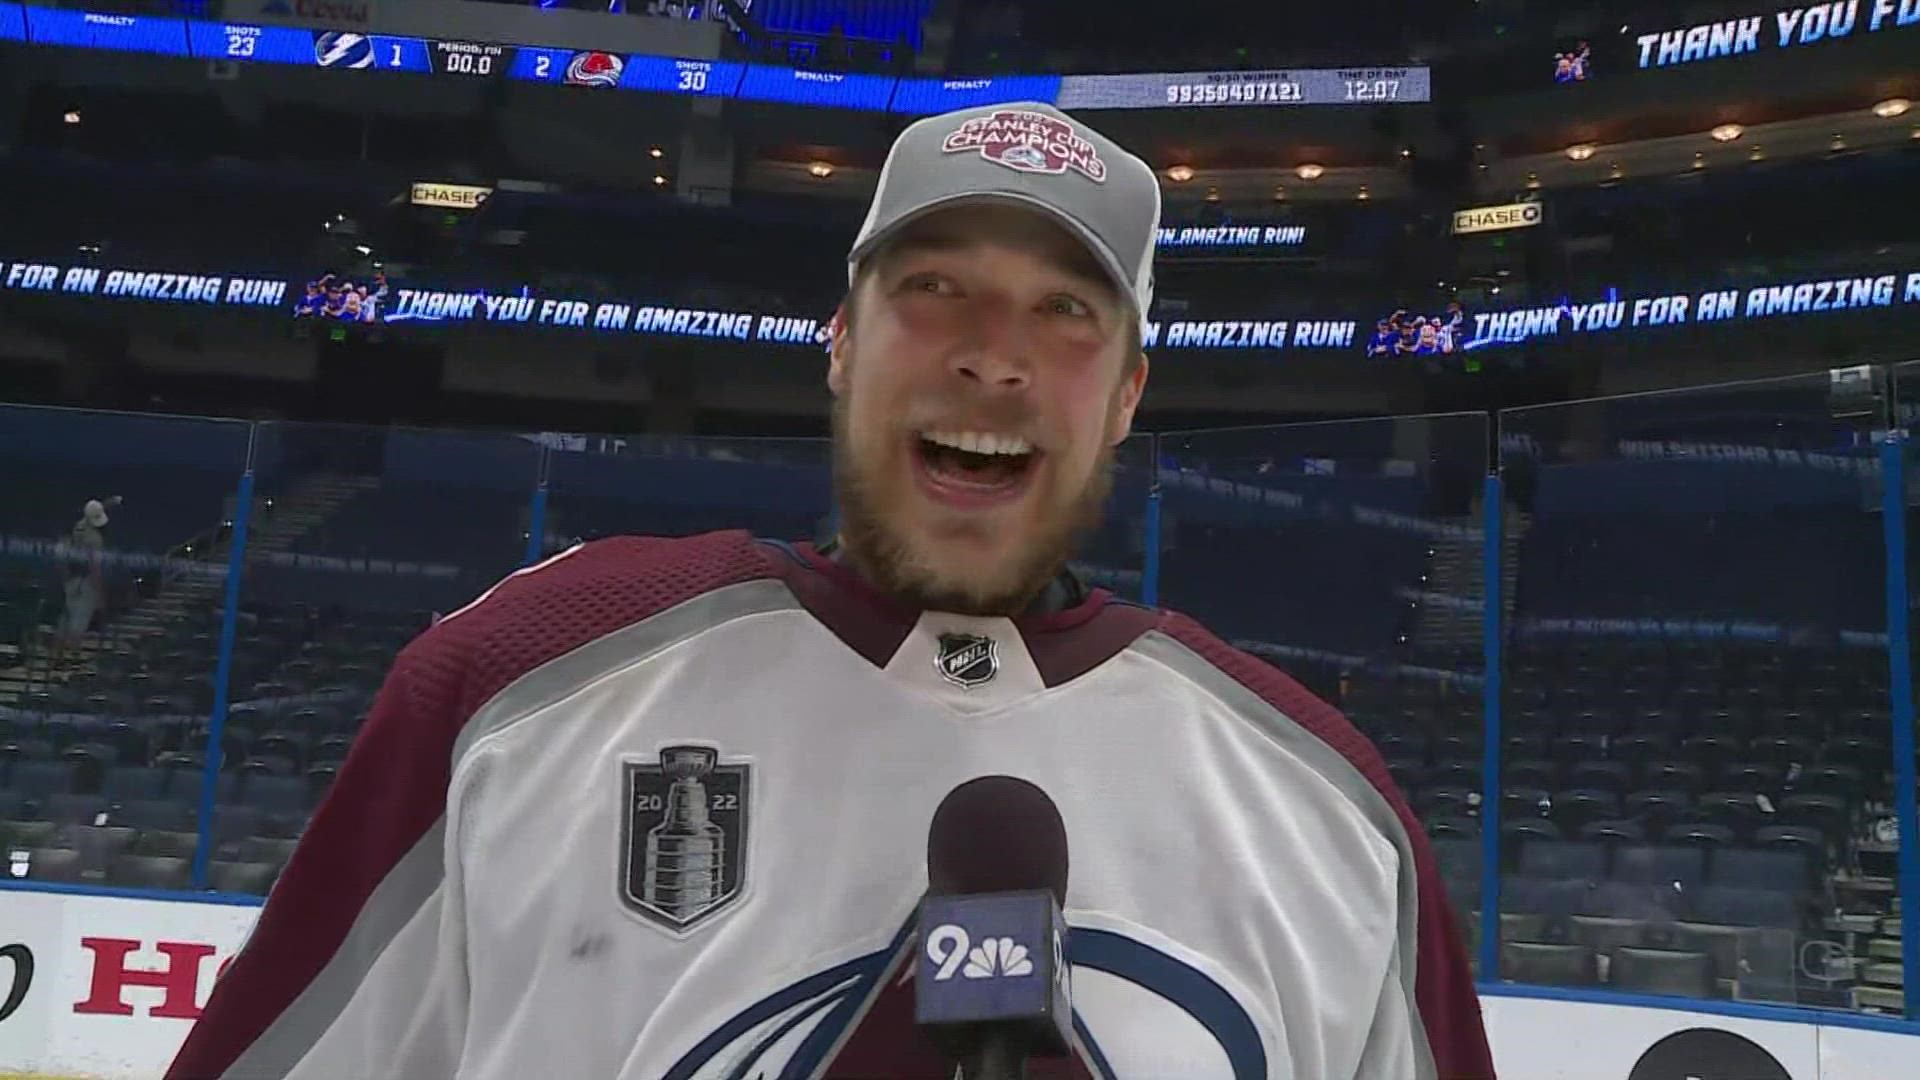 More players from the Colorado Avalanche speak on what this win means to them and the journey to the Stanley Cup.